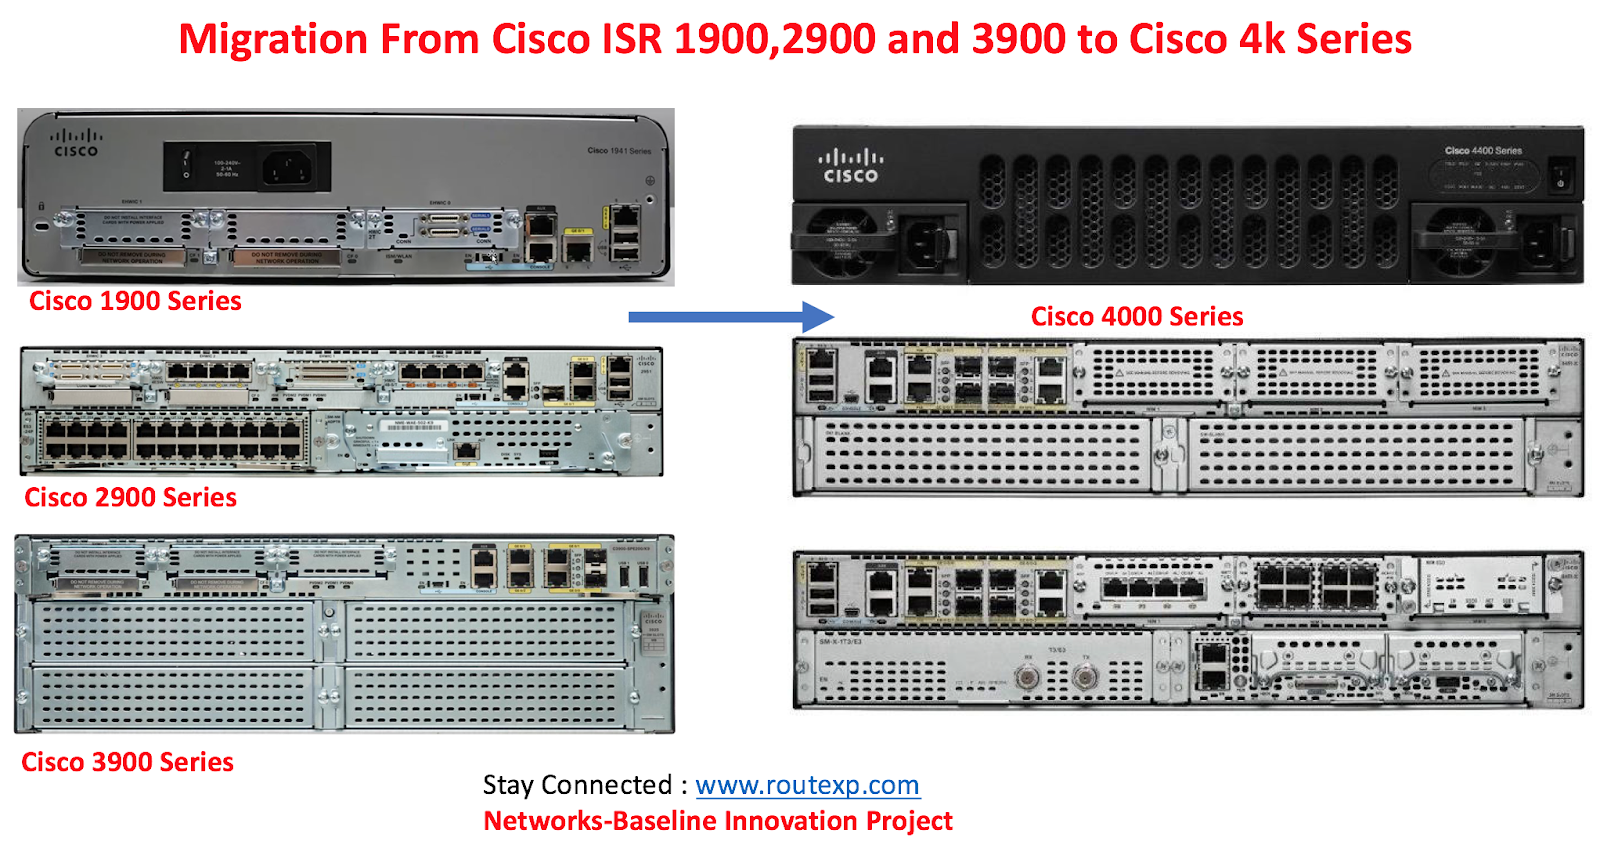 Difference between cisco 1900 and 2900 place beautiful ethereal girl names